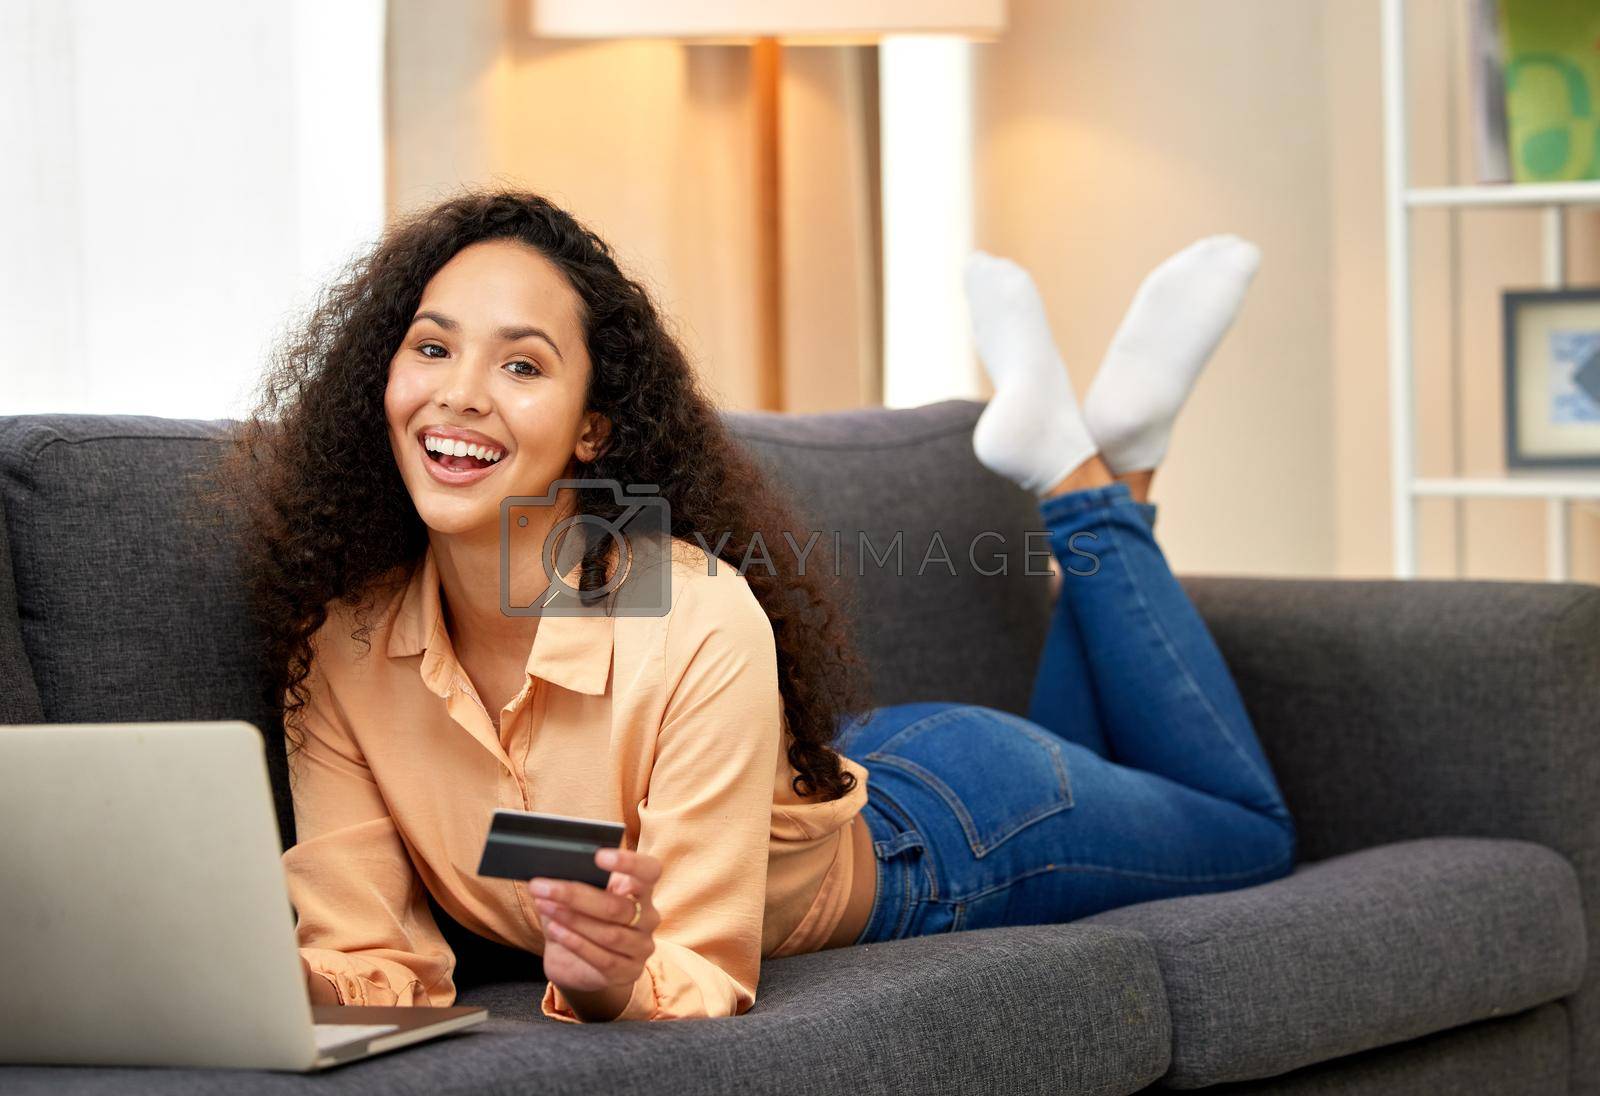 Royalty free image of Secure your order. a woman holding a credit card while using her laptop. by YuriArcurs